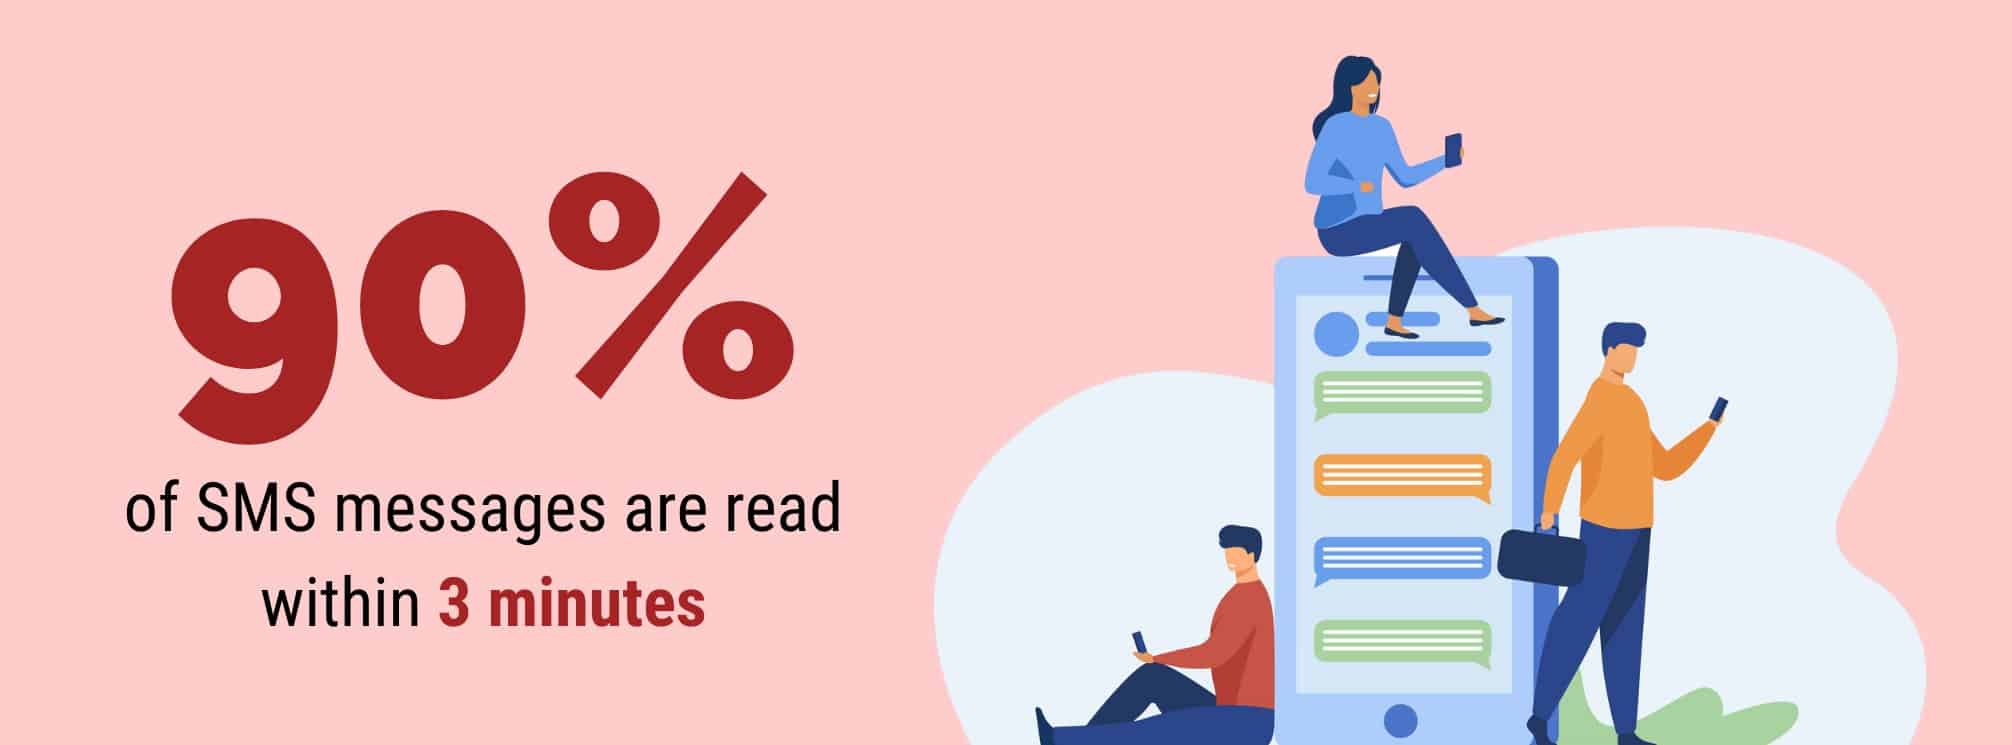 90% of SMS messages are read within 3 minutes